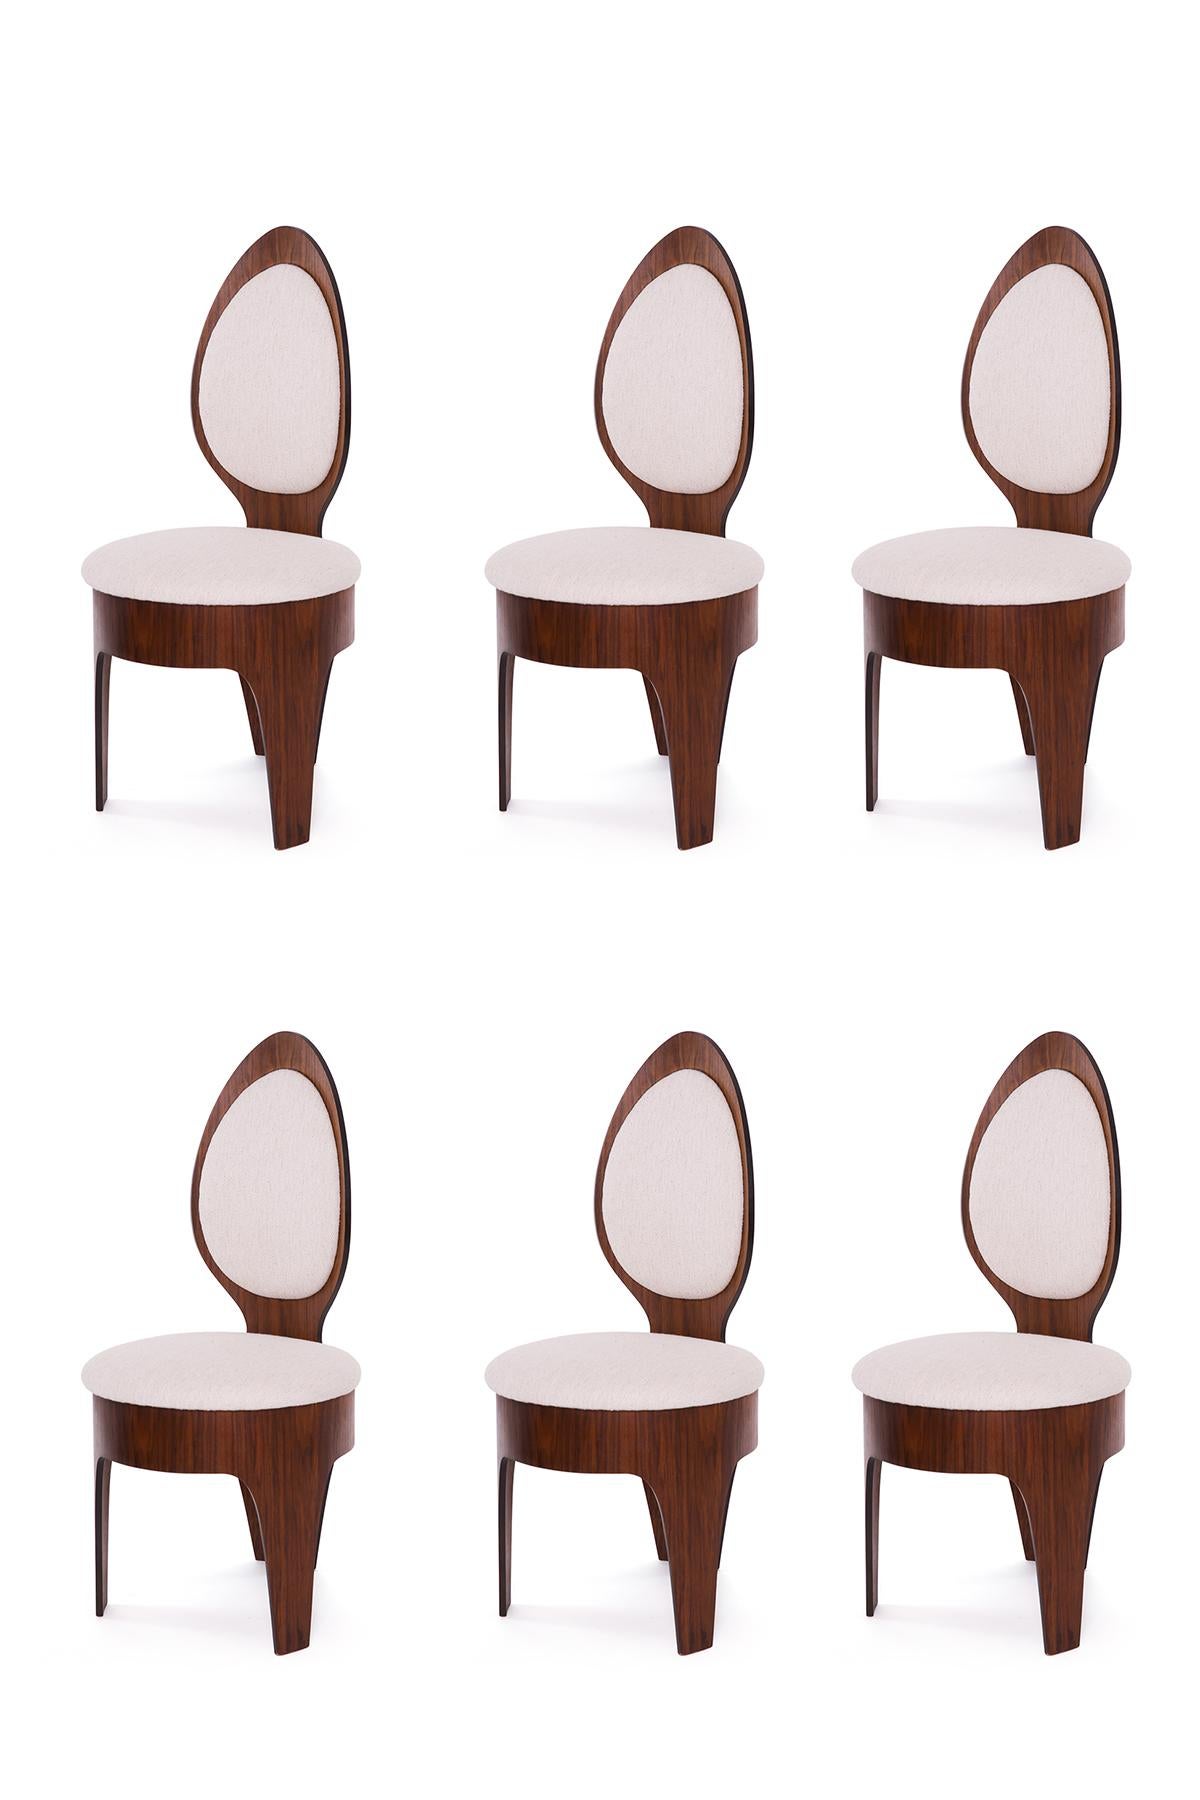 Henry Glass Walnut 'Spoon' Dining Chairs 1